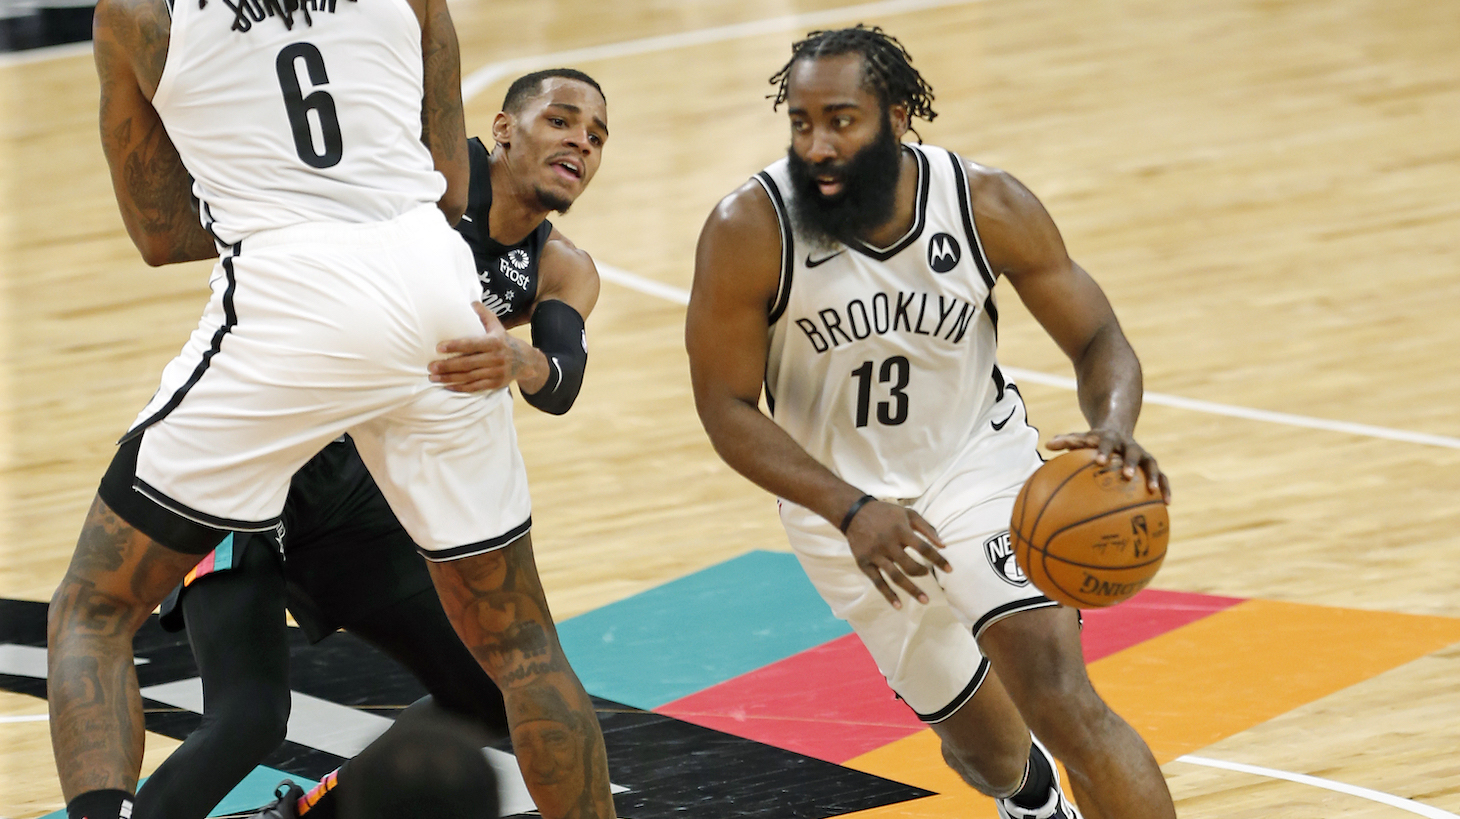 SAN ANTONIO, TX - MARCH 1: James Harden #13 of the Brooklyn Nets drives off a screen by DeAndre Jordan #6 against Dejounte Murray #5 of the San Antonio Spurs in the second half at AT&amp;T Center on March 1, 2021 in San Antonio, Texas. NOTE TO USER: User expressly acknowledges and agrees that , by downloading and or using this photograph, User is consenting to the terms and conditions of the Getty Images License Agreement. (Photo by Ronald Cortes/Getty Images)